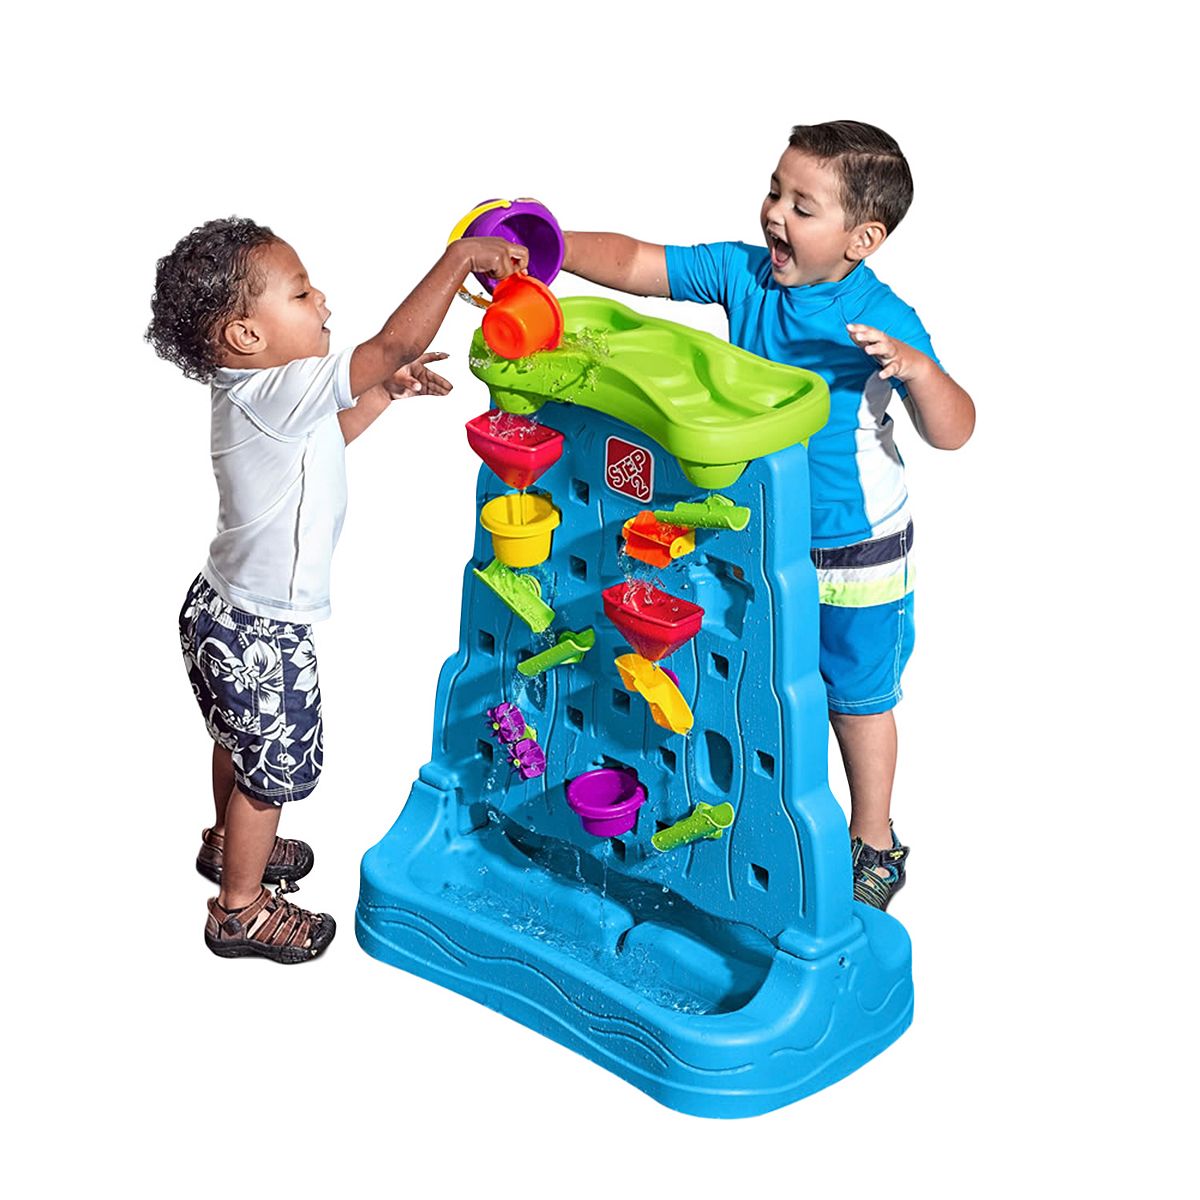 13-Piece Step2 Waterfall Discovery Wall Double-Sided Outdoor Water Play Set $40 + Free Shipping